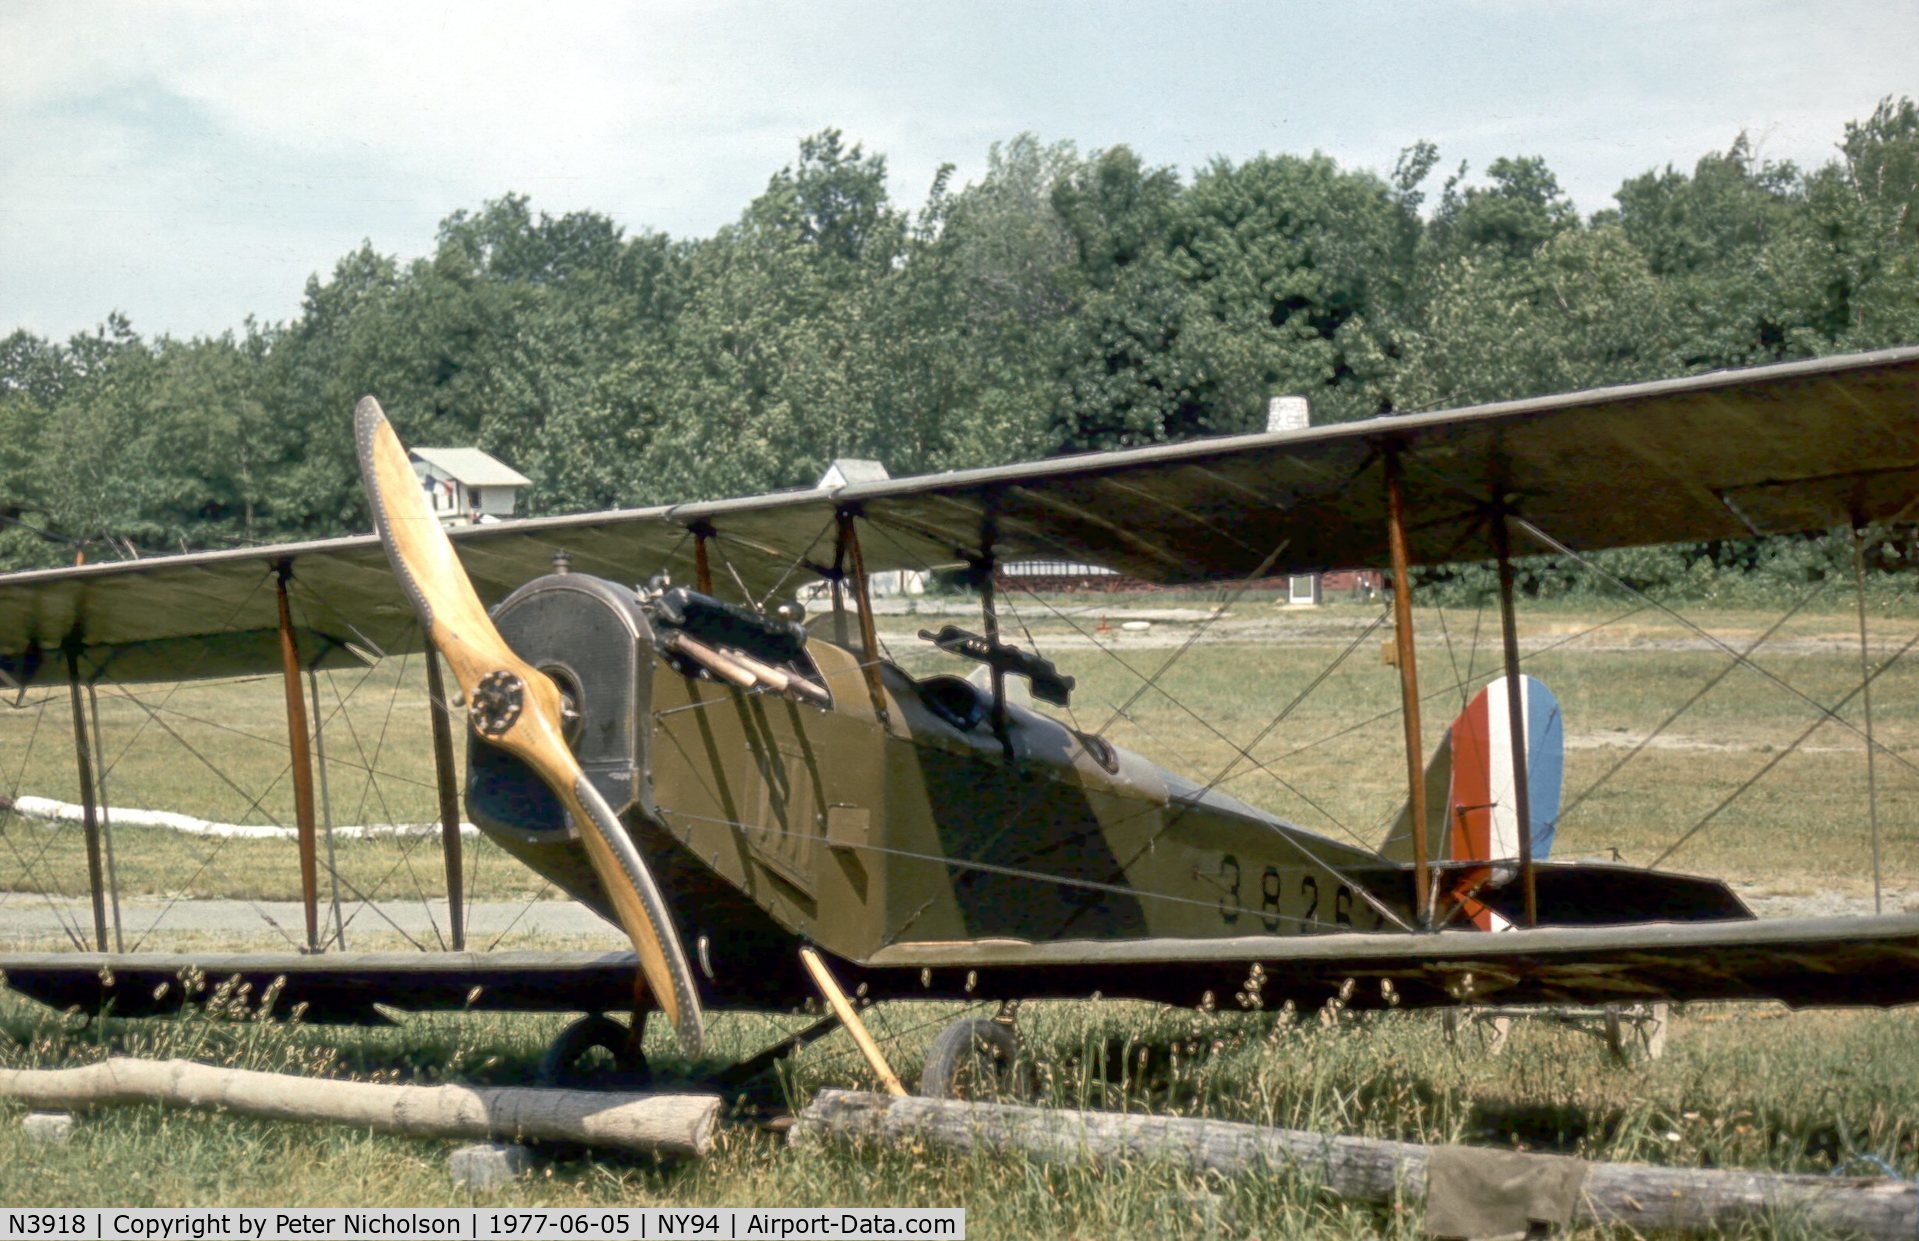 N3918, 1919 Curtiss JN-4H Jenny C/N 3919, Cole Palen's Jenny at the June 1977 Rhinebeck Airshow.